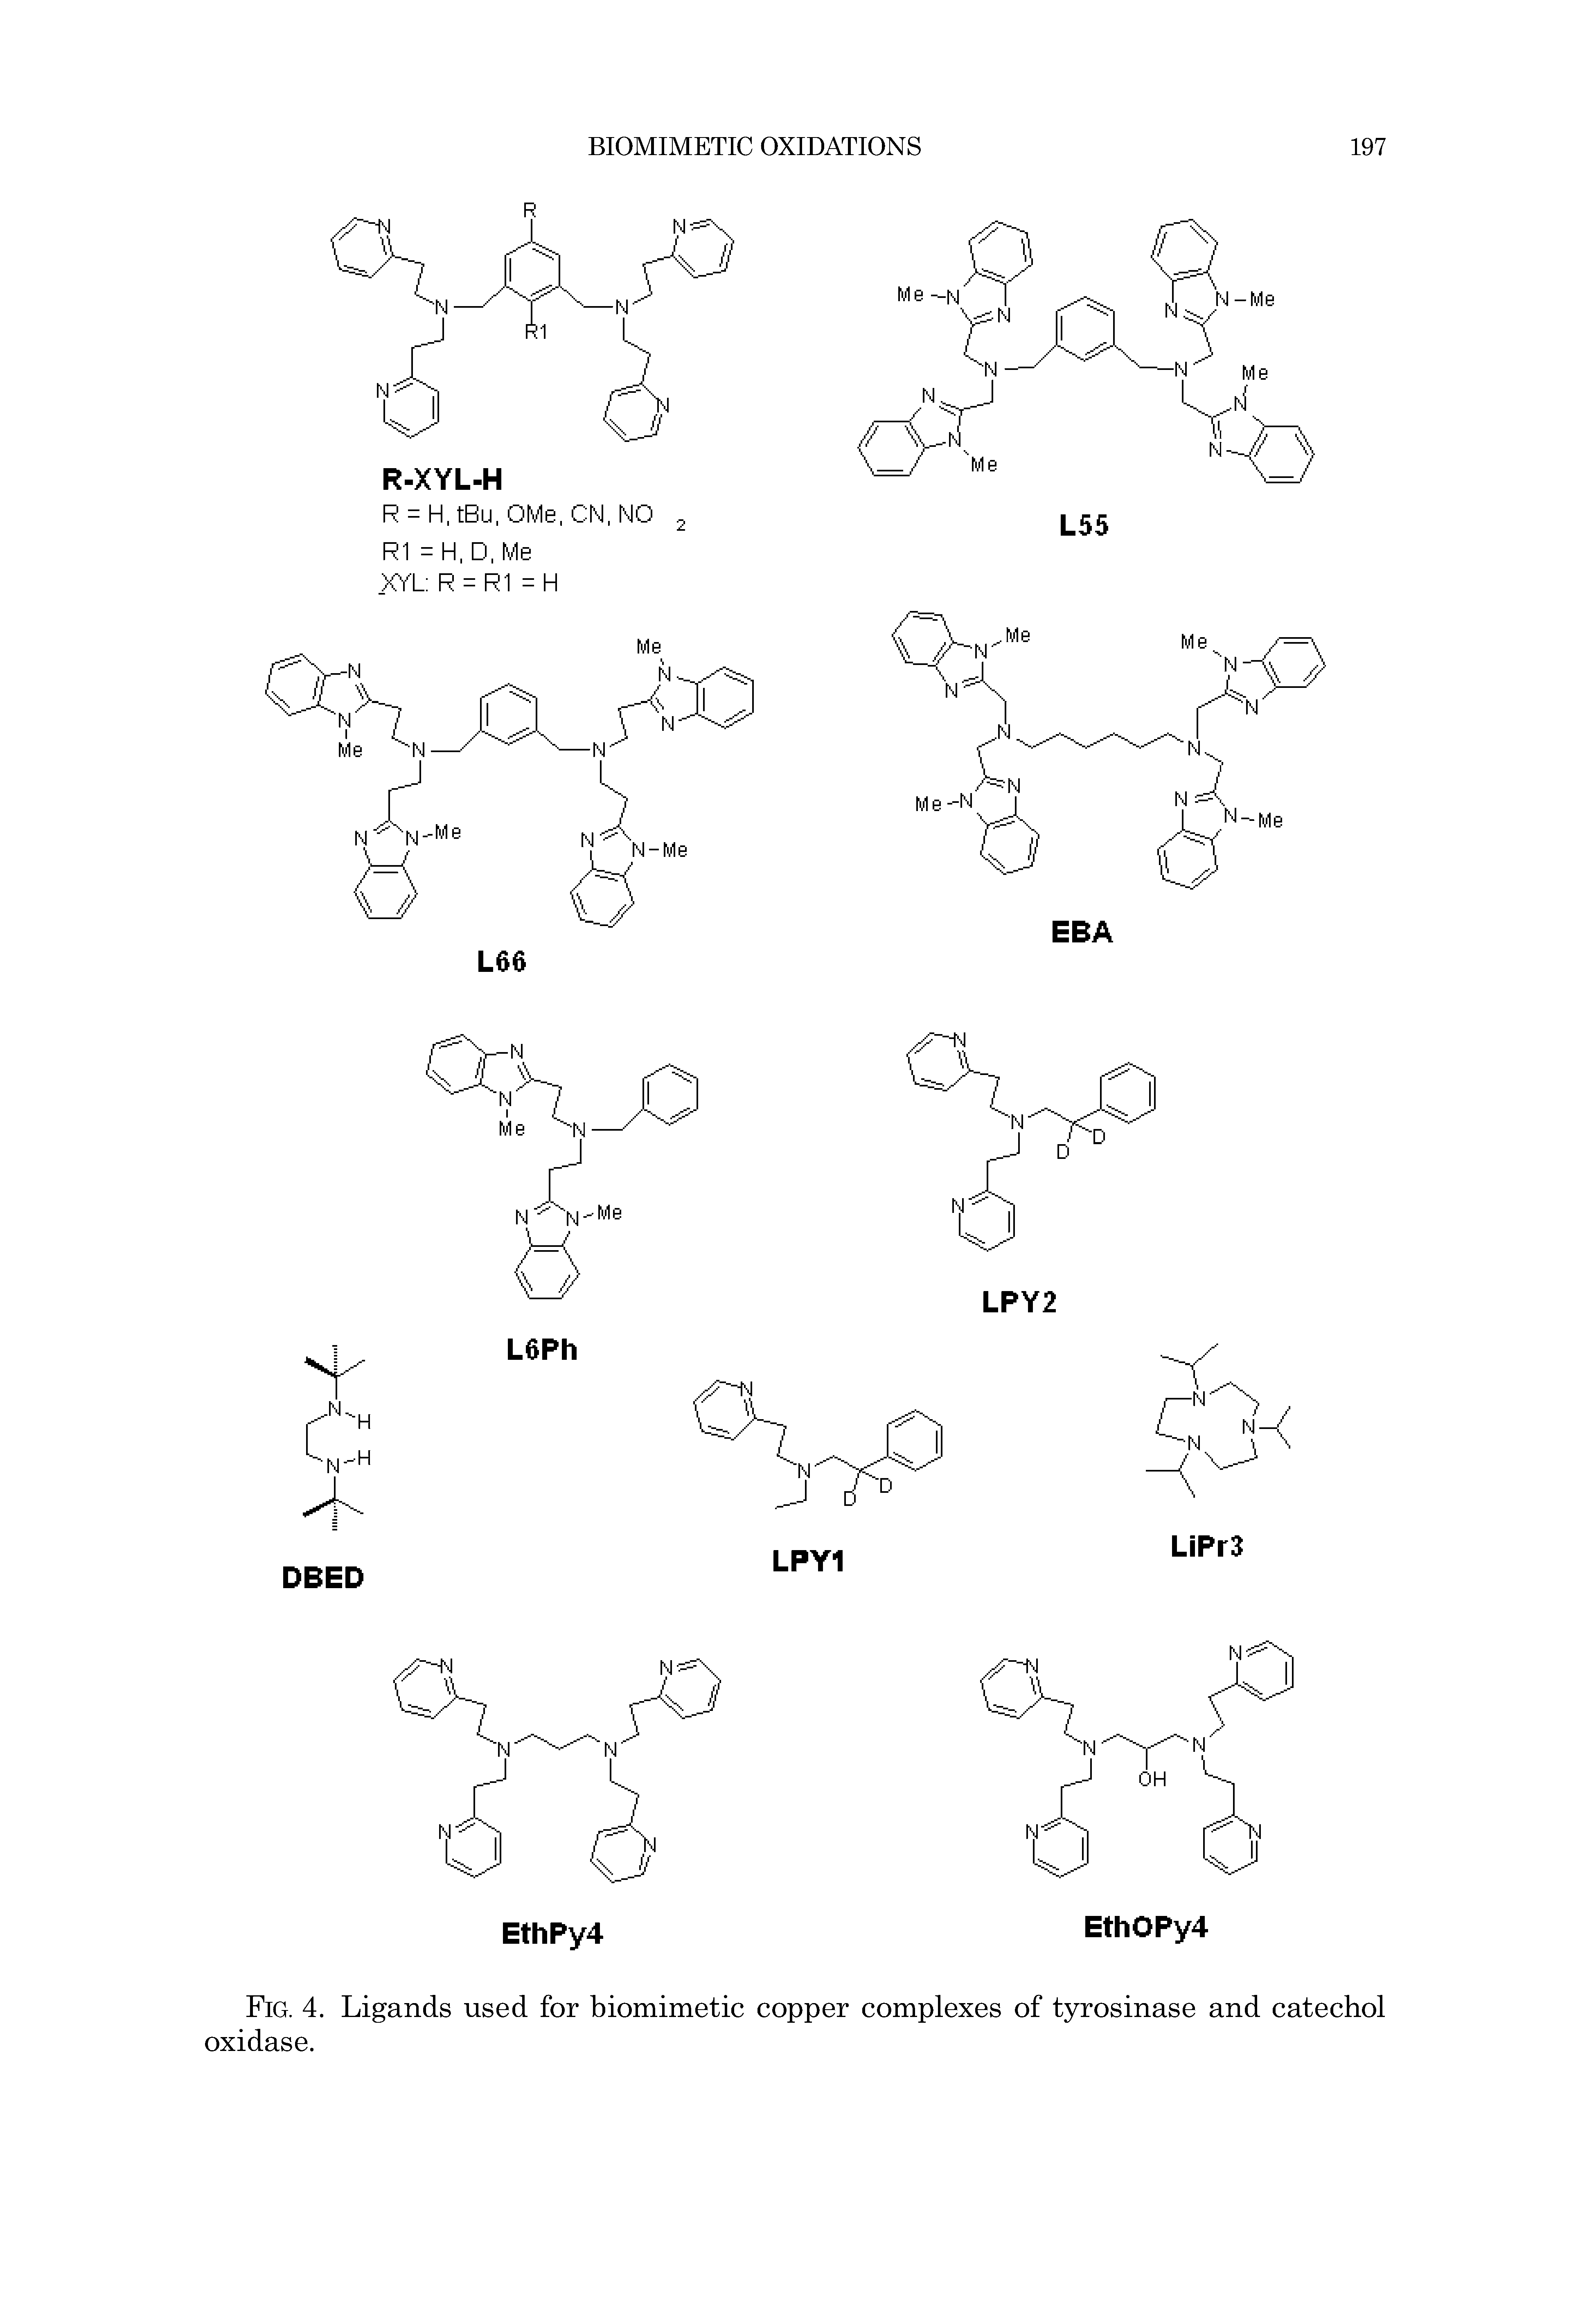 Fig. 4. Ligands used for biomimetic copper complexes of tyrosinase and catechol oxidase.